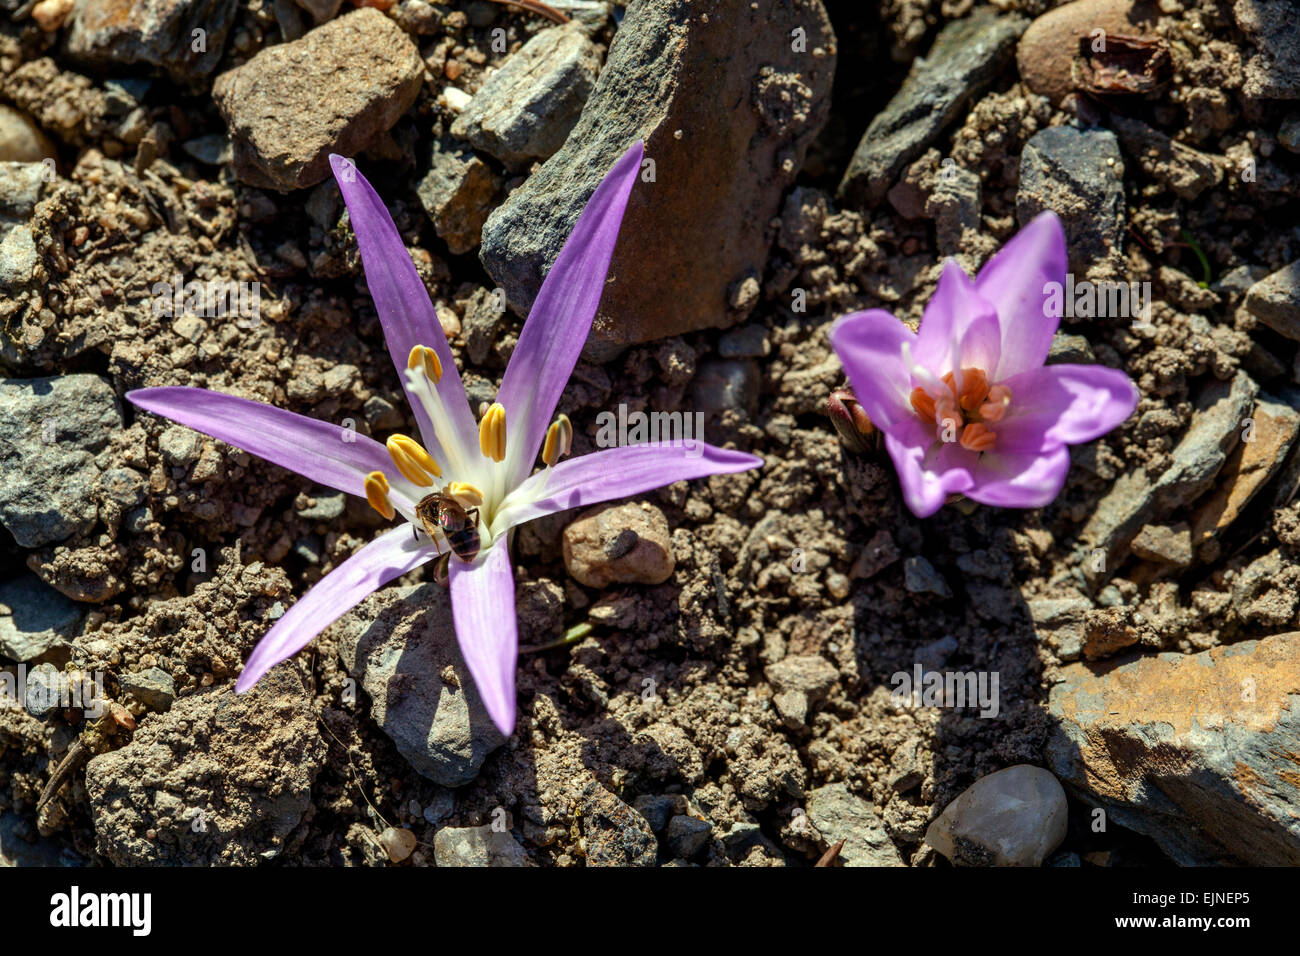 First Spring flowers Meadow saffron Bulbocodium vernum is an alpine bulbous plant for rockery March flower opening growing up soil ground alpine plant Stock Photo